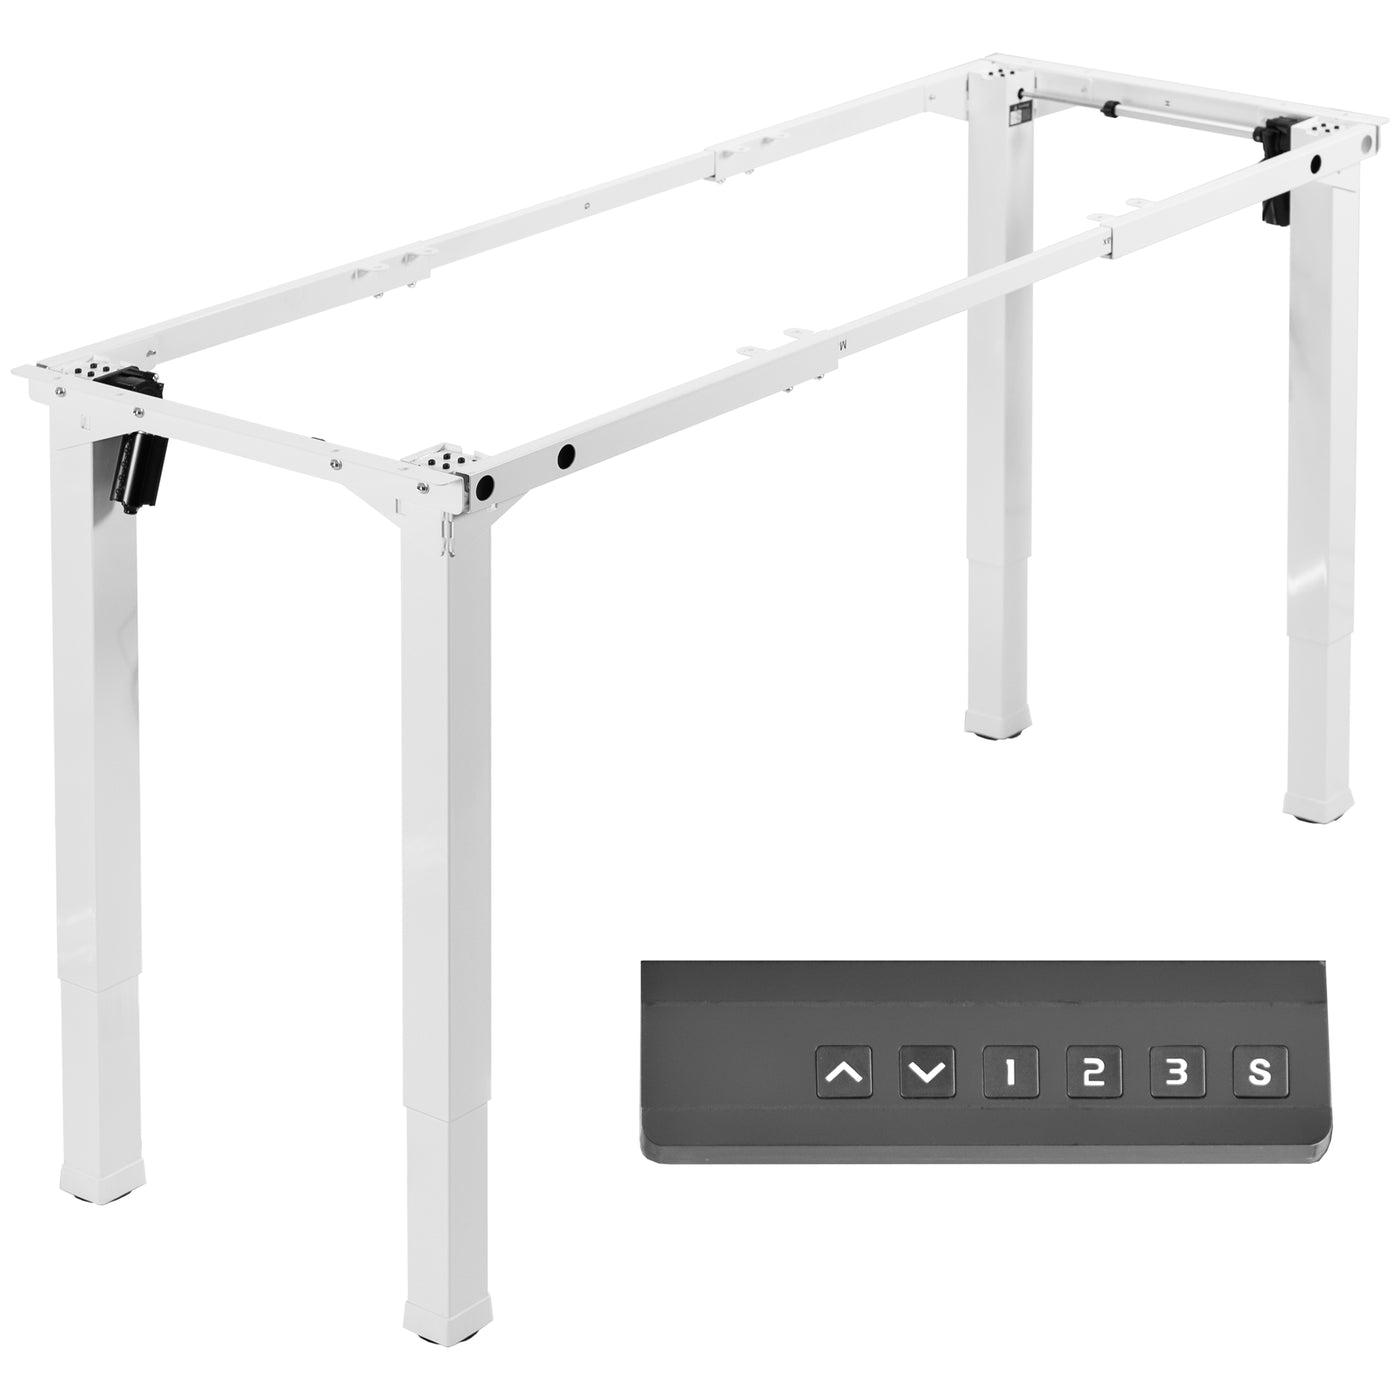 Sturdy electric desk frame with heavy-duty 4-leg design. Height adjustment with 3-setting memory controller, and frame width adjustment to personalize your workstation.